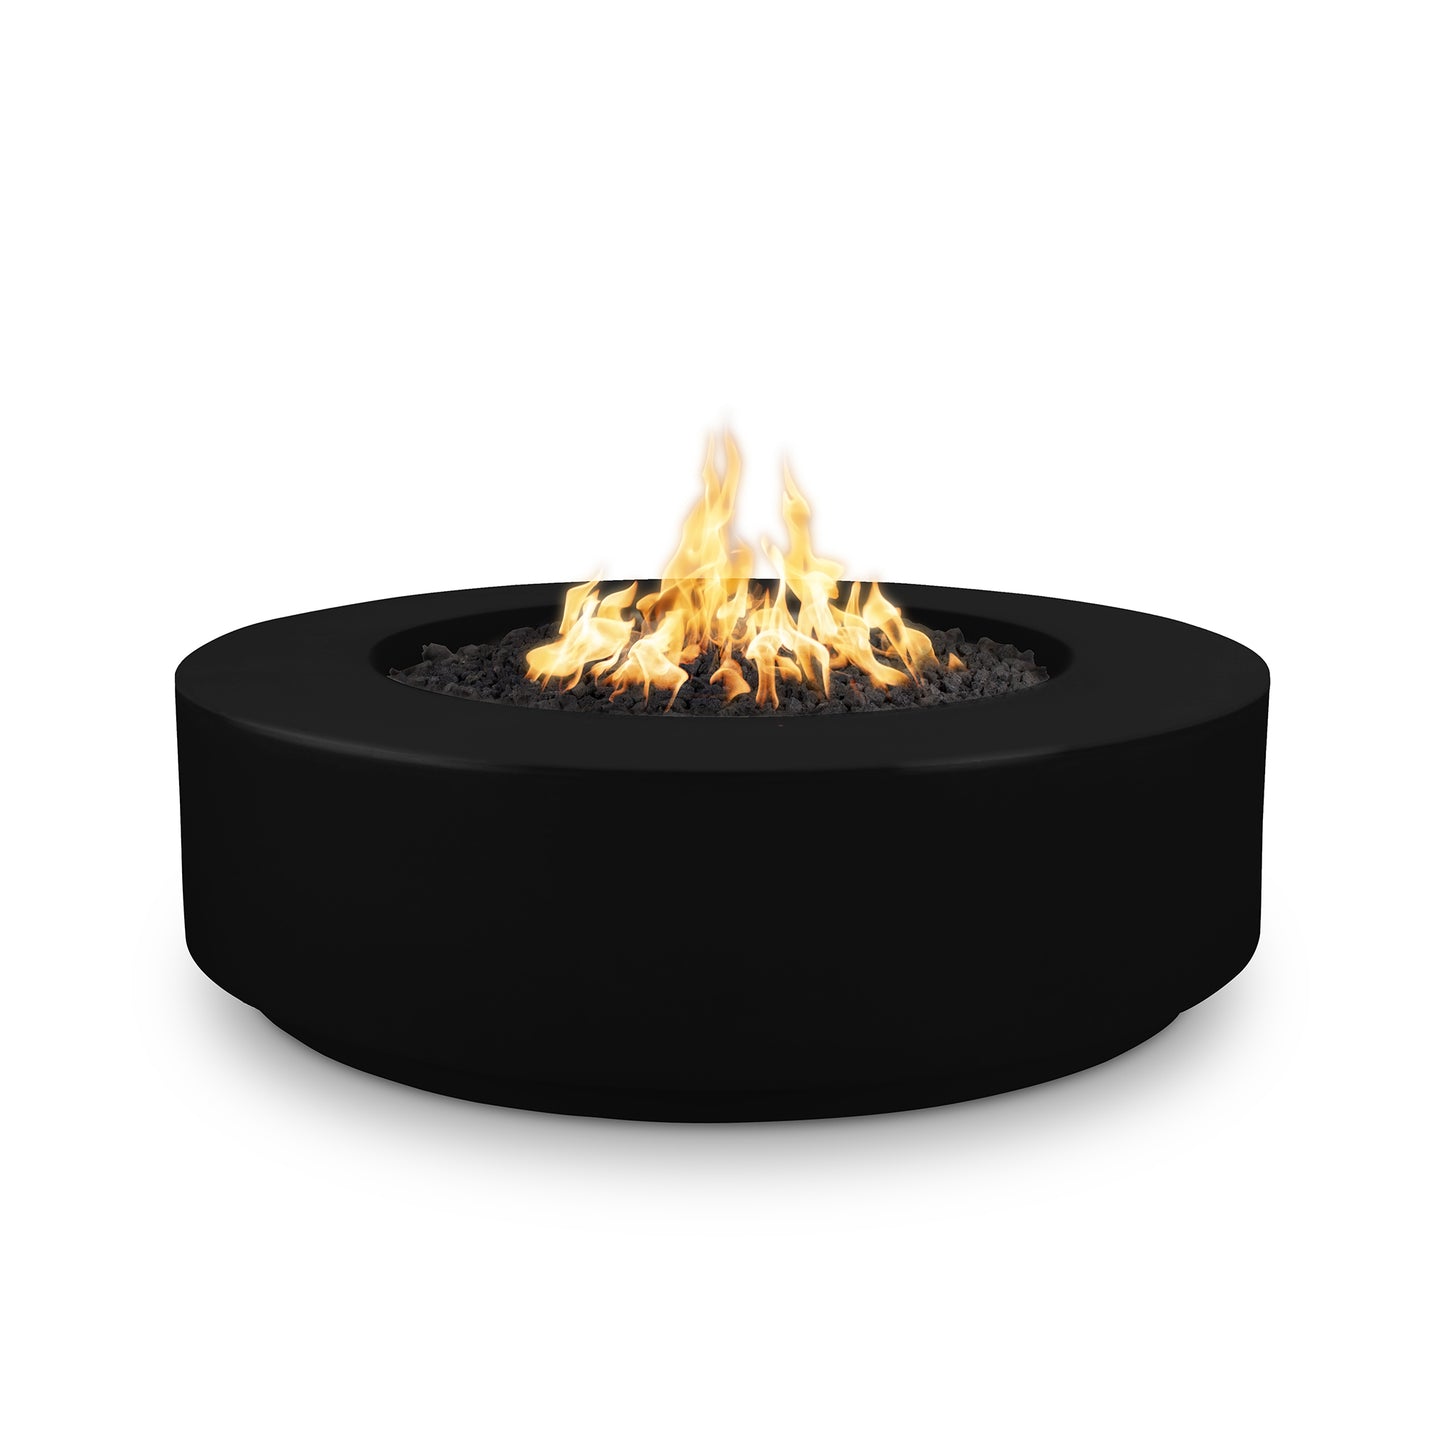 Florence Concrete Fire Pit 42" Low Profile - Electronic Ignition